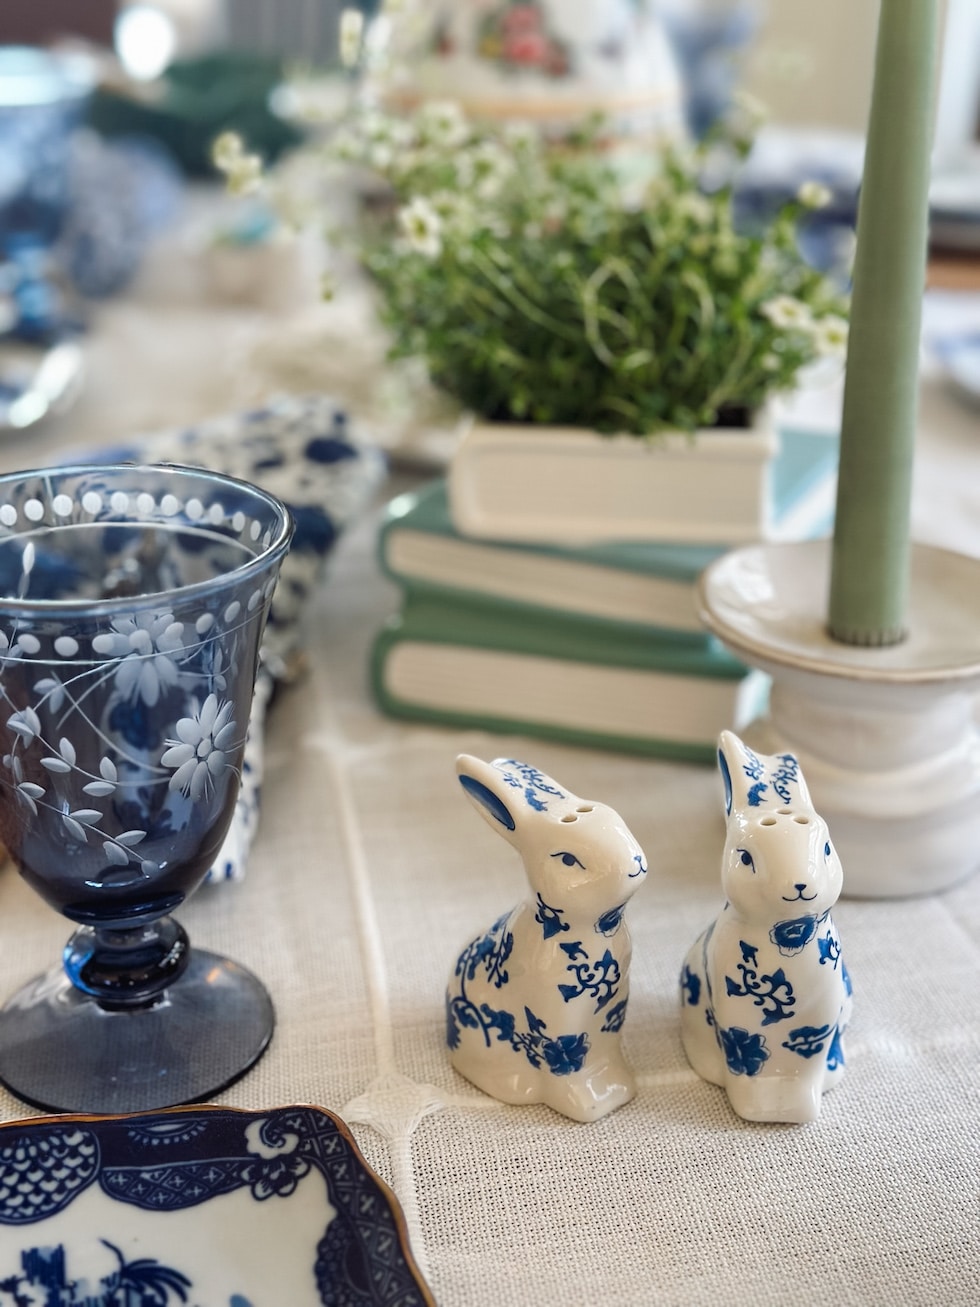 Our Blue and White and Green Easter Table